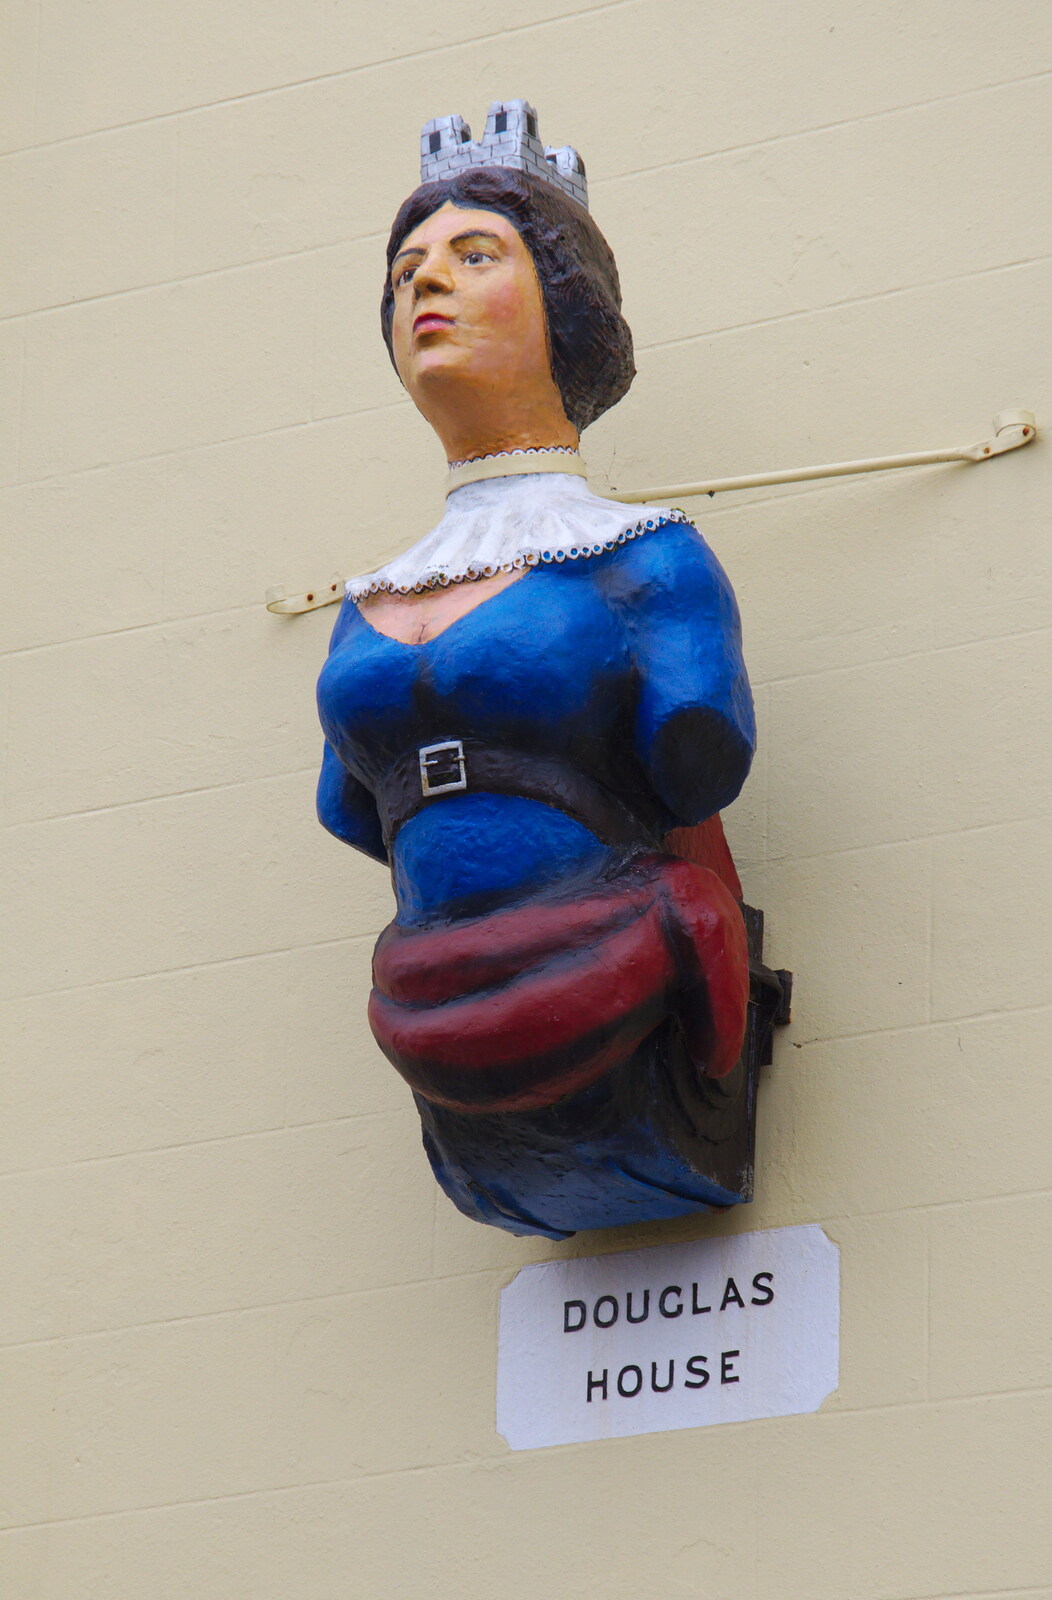 A ship's figurehead on the wall of Douglas House from A Night at the Crown Hotel, Southwold, Suffolk - 8th November 2019